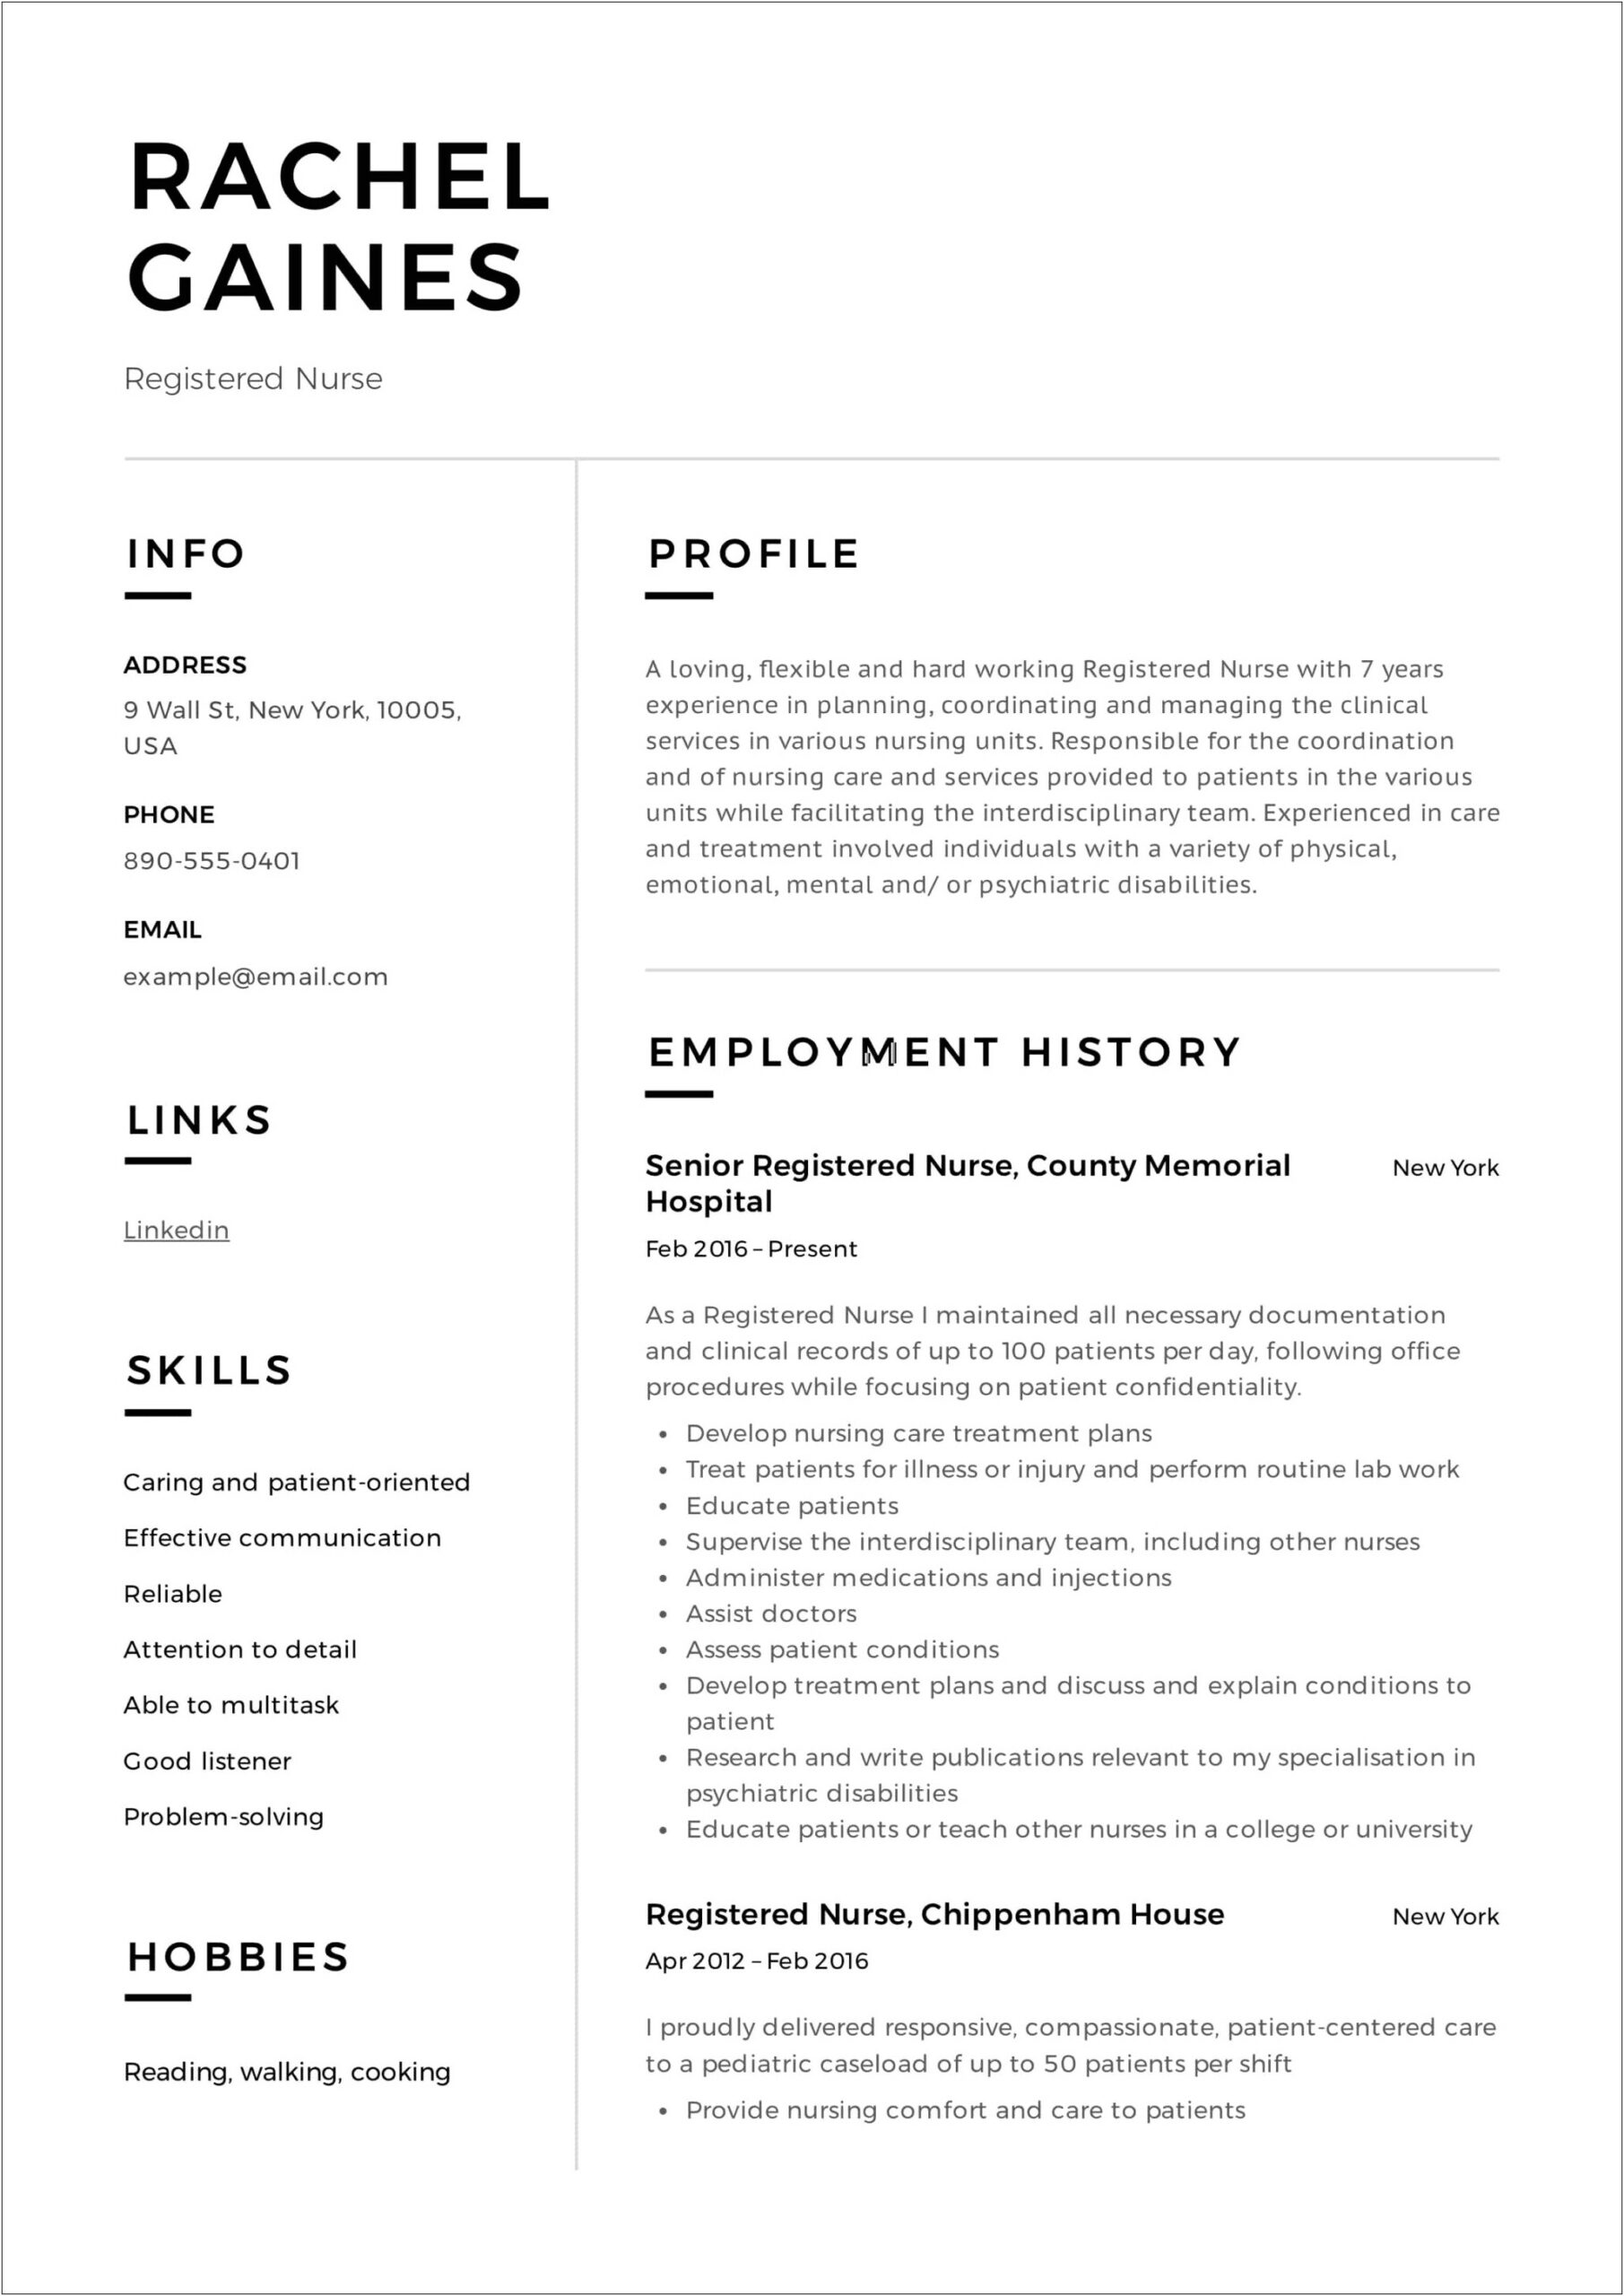 Work Experience Section Of Resume New Grad Rn